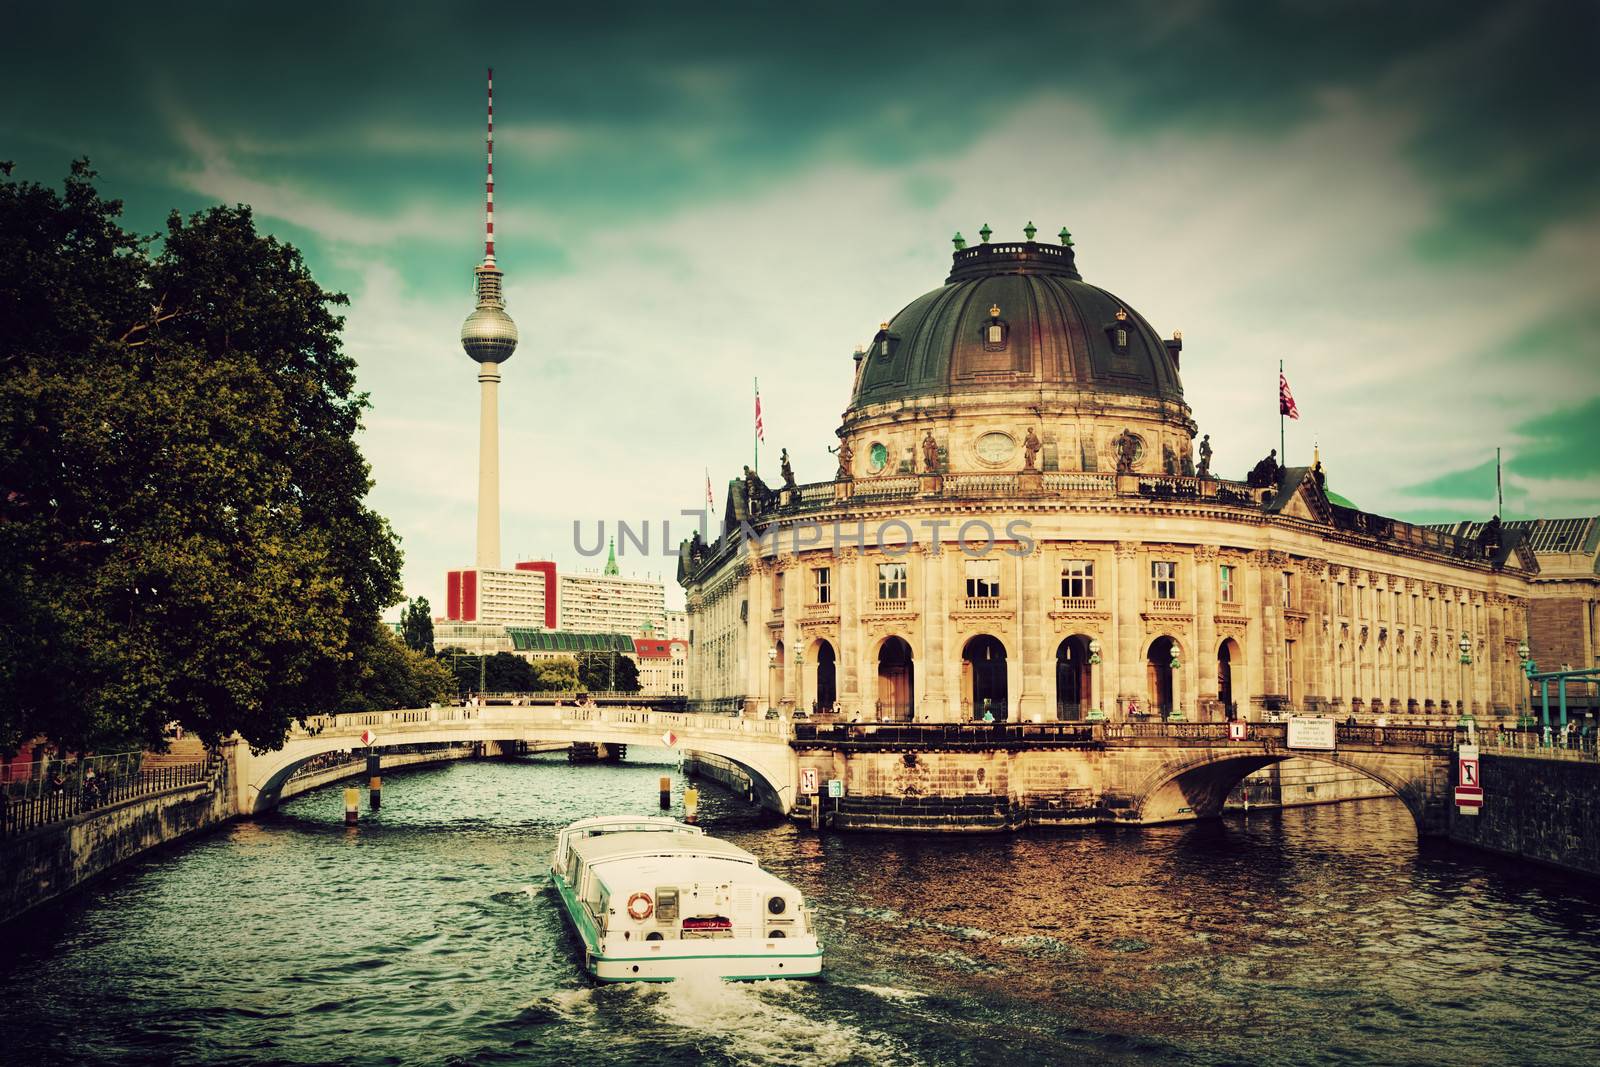 The Bode Museum on the Museum Island in Berlin, Germany. Retro, vintage style